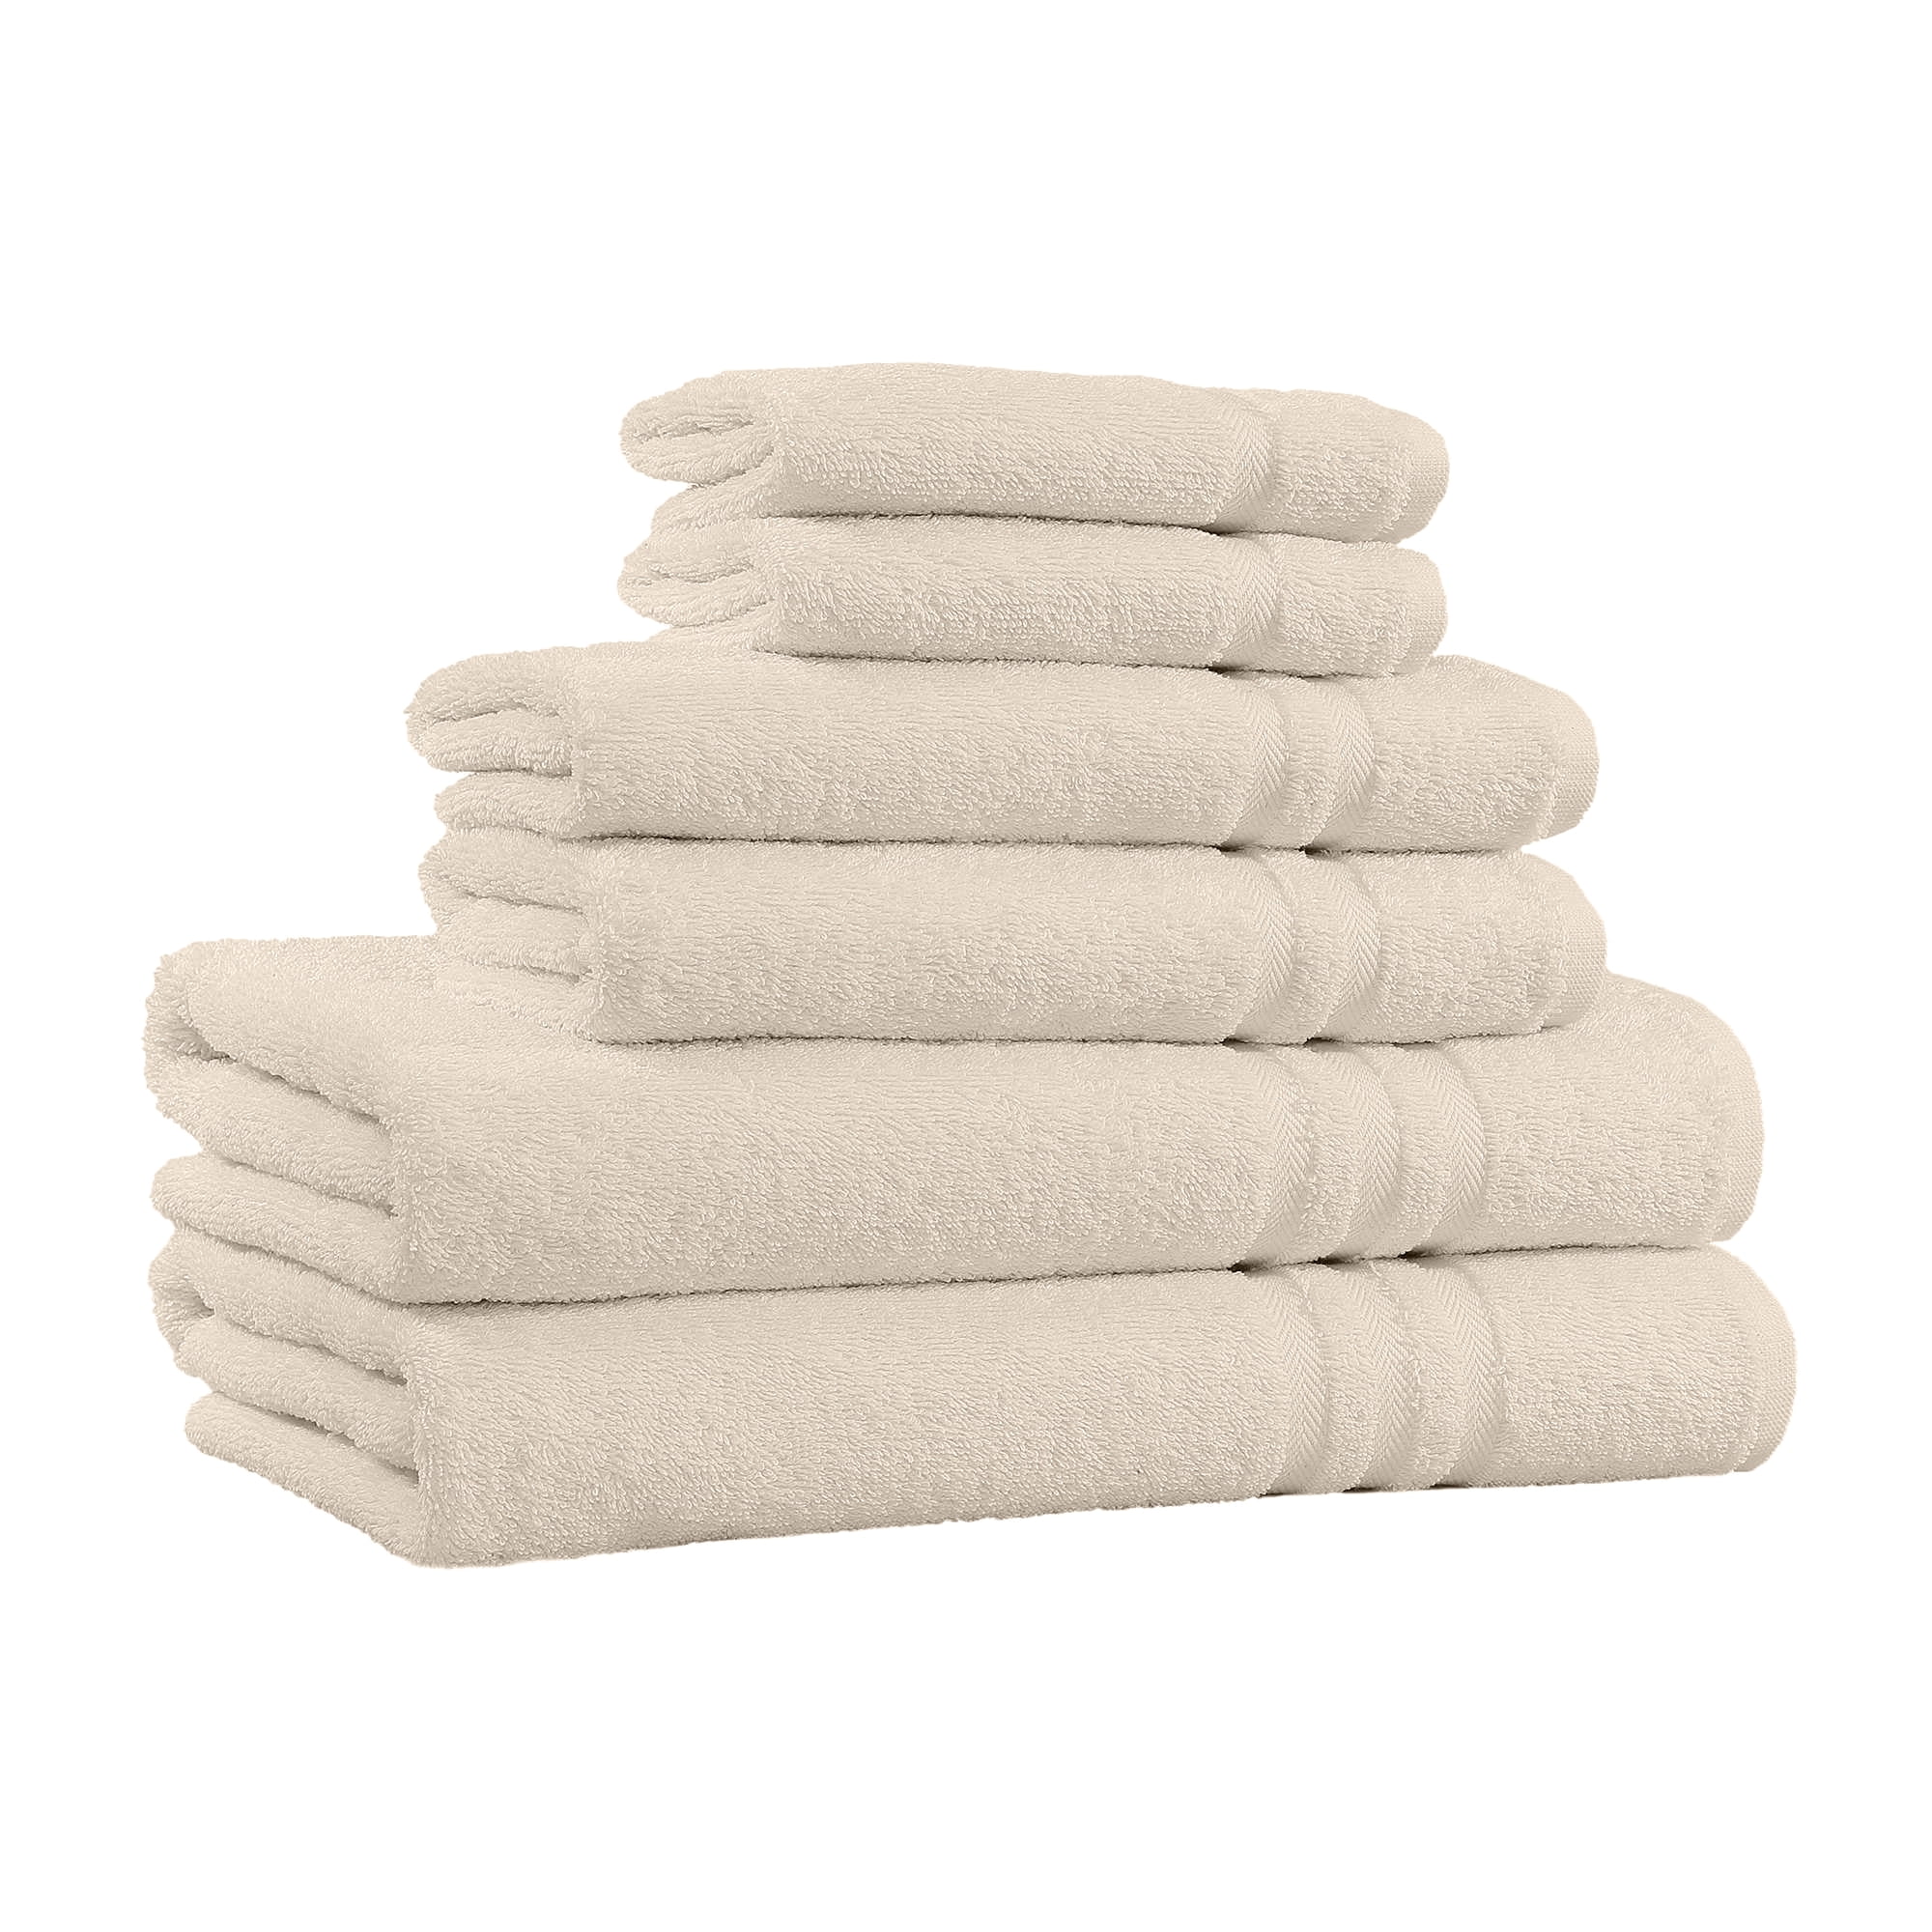 3 new white bath towels pacific mills 24x50 100% cotton absorbent fast dry 